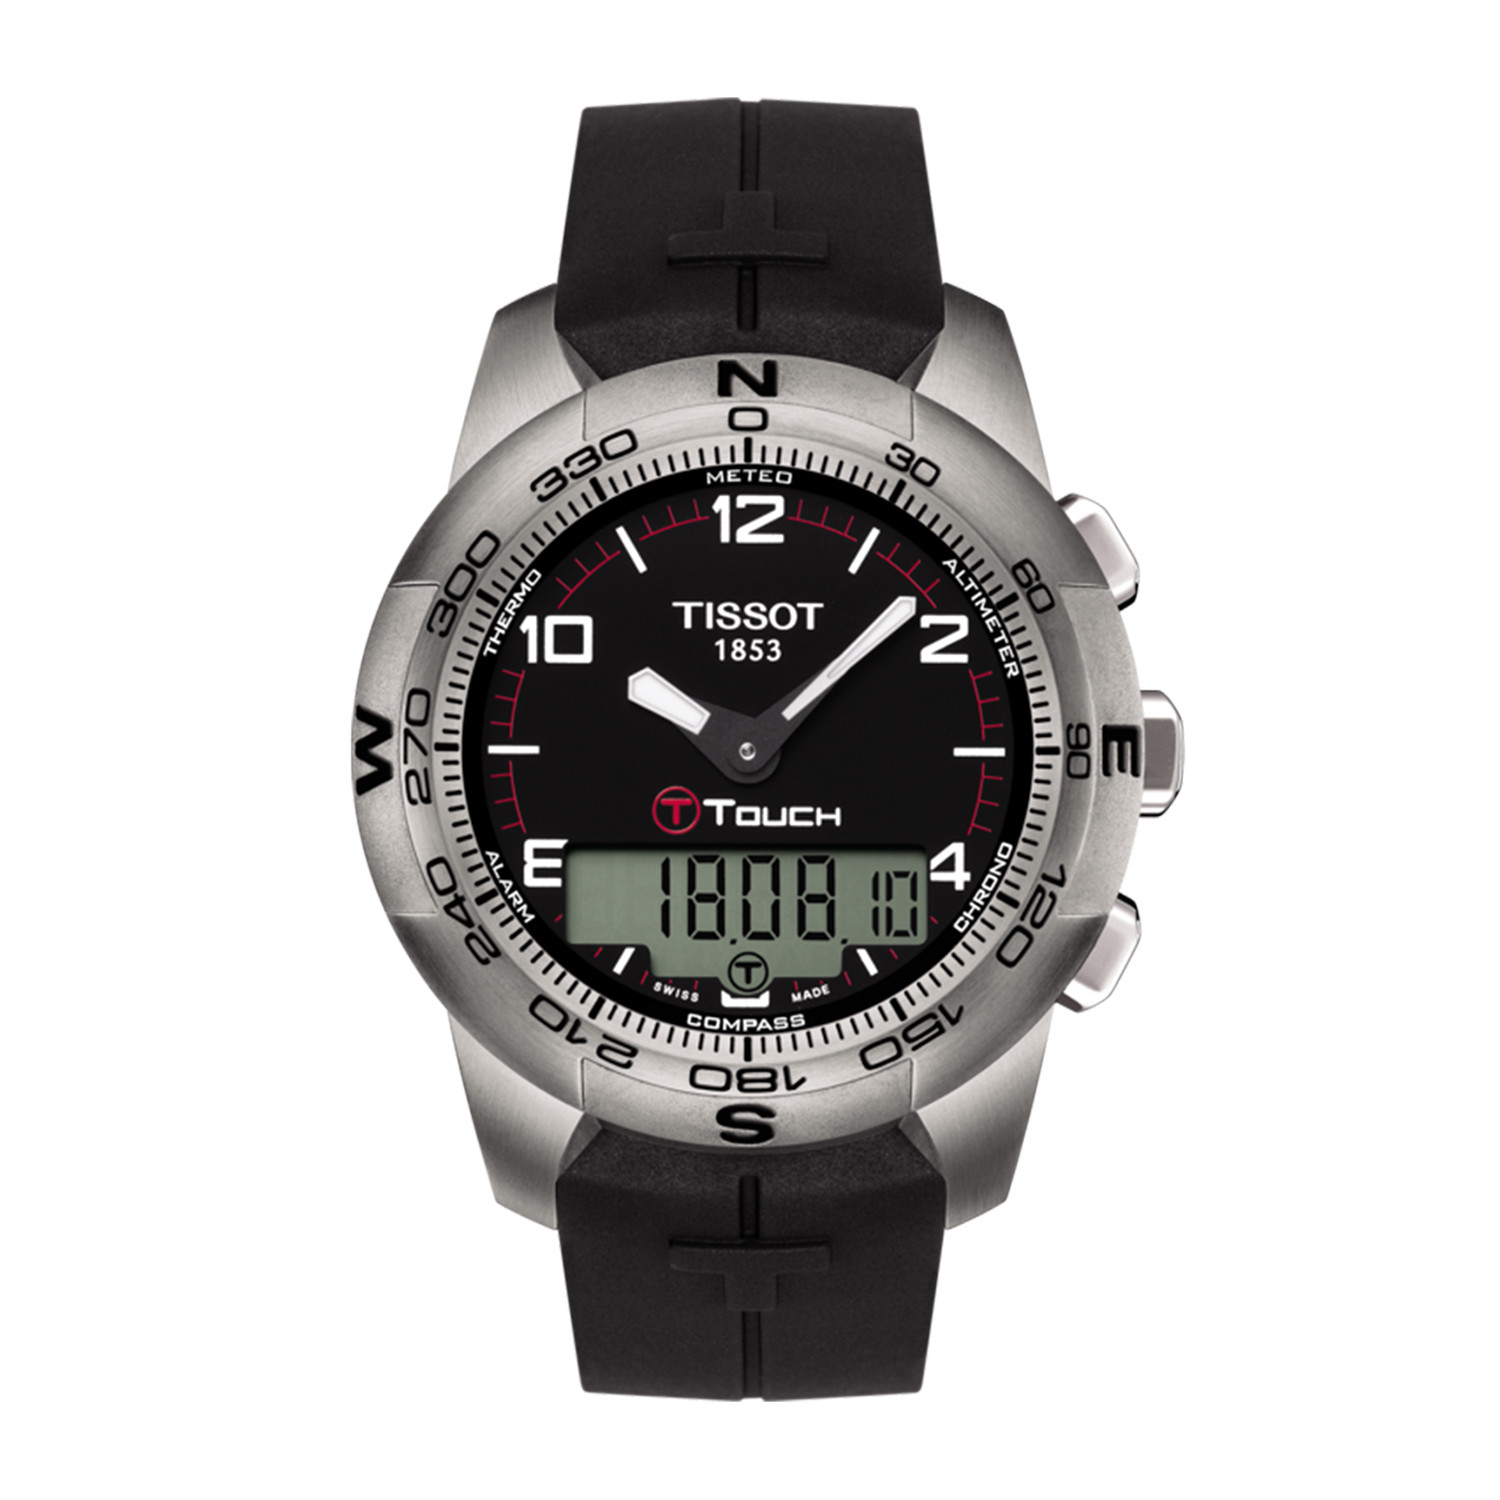 Tissot t touch classic manual